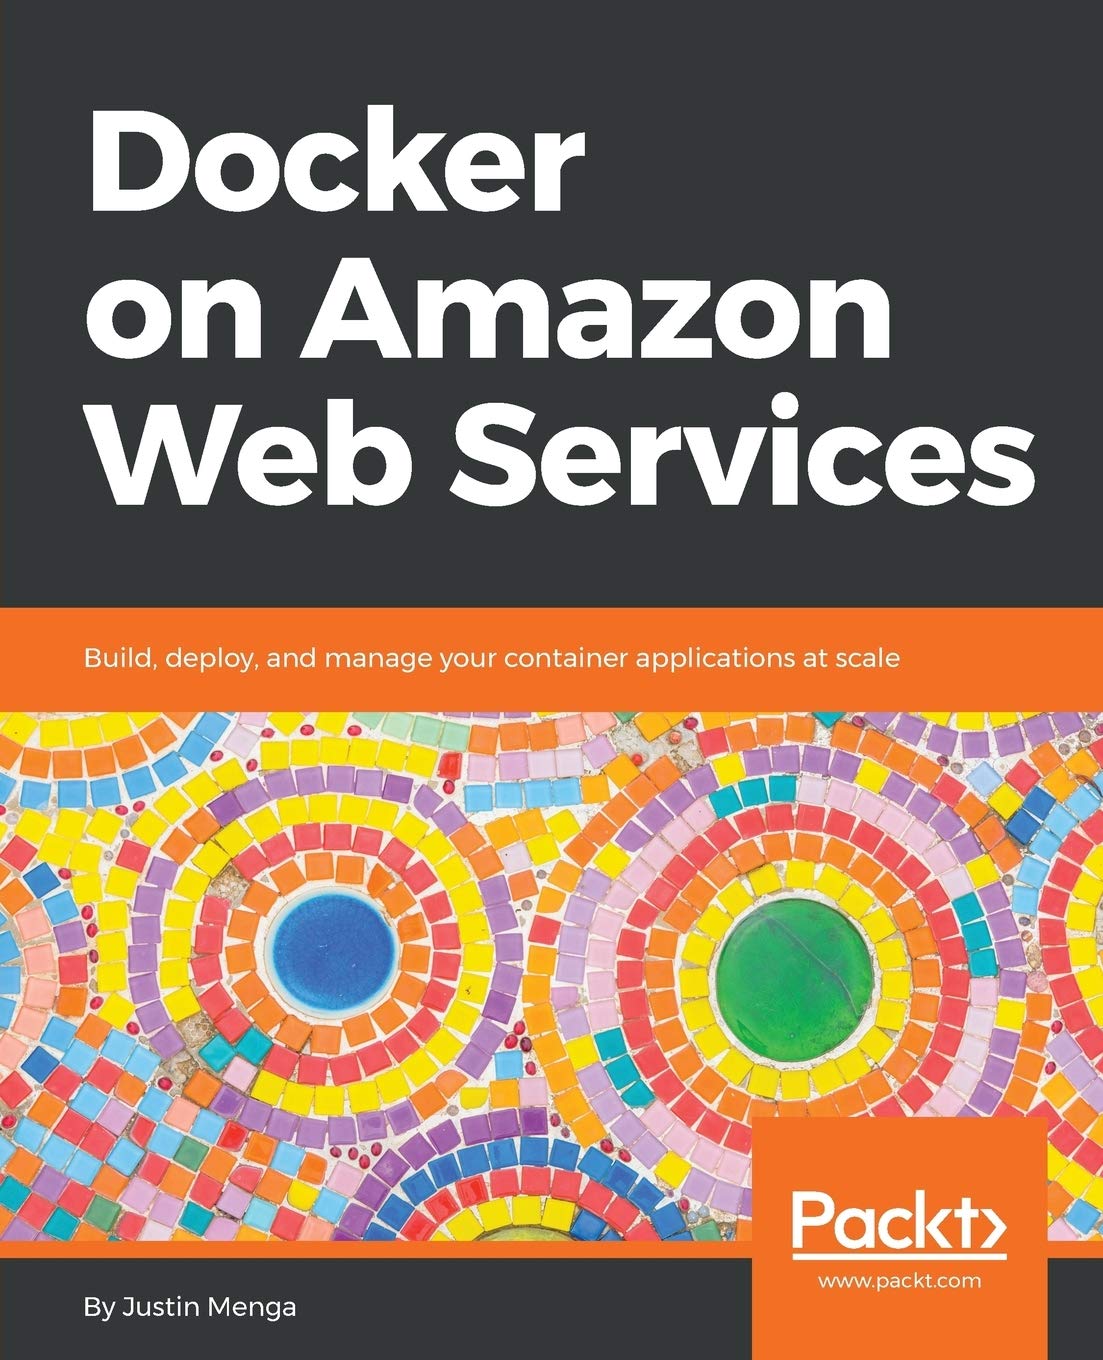 Docker on Amazon Web Services: Build, deploy, and manage your container applications at scale